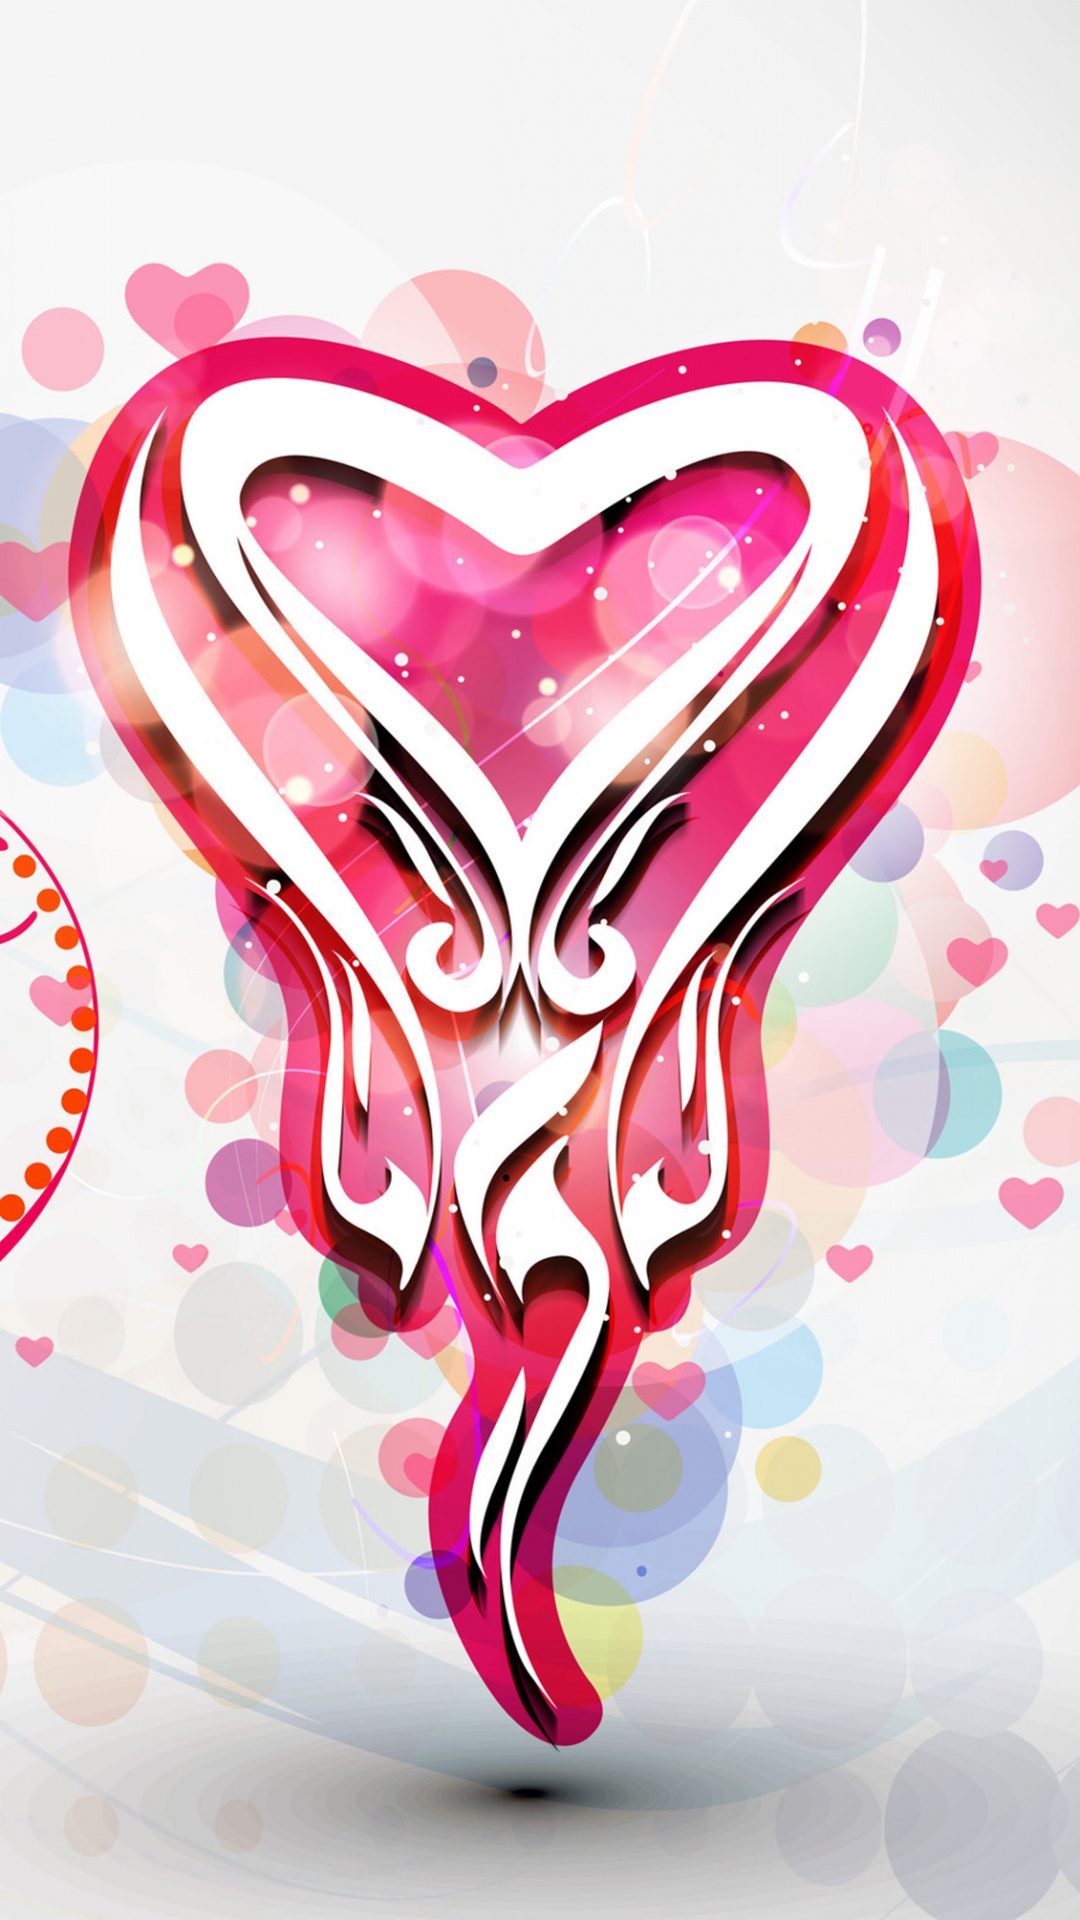 Valentines Day, Heart, Pink, Text, Love. Wallpaper in 1080x1920 Resolution